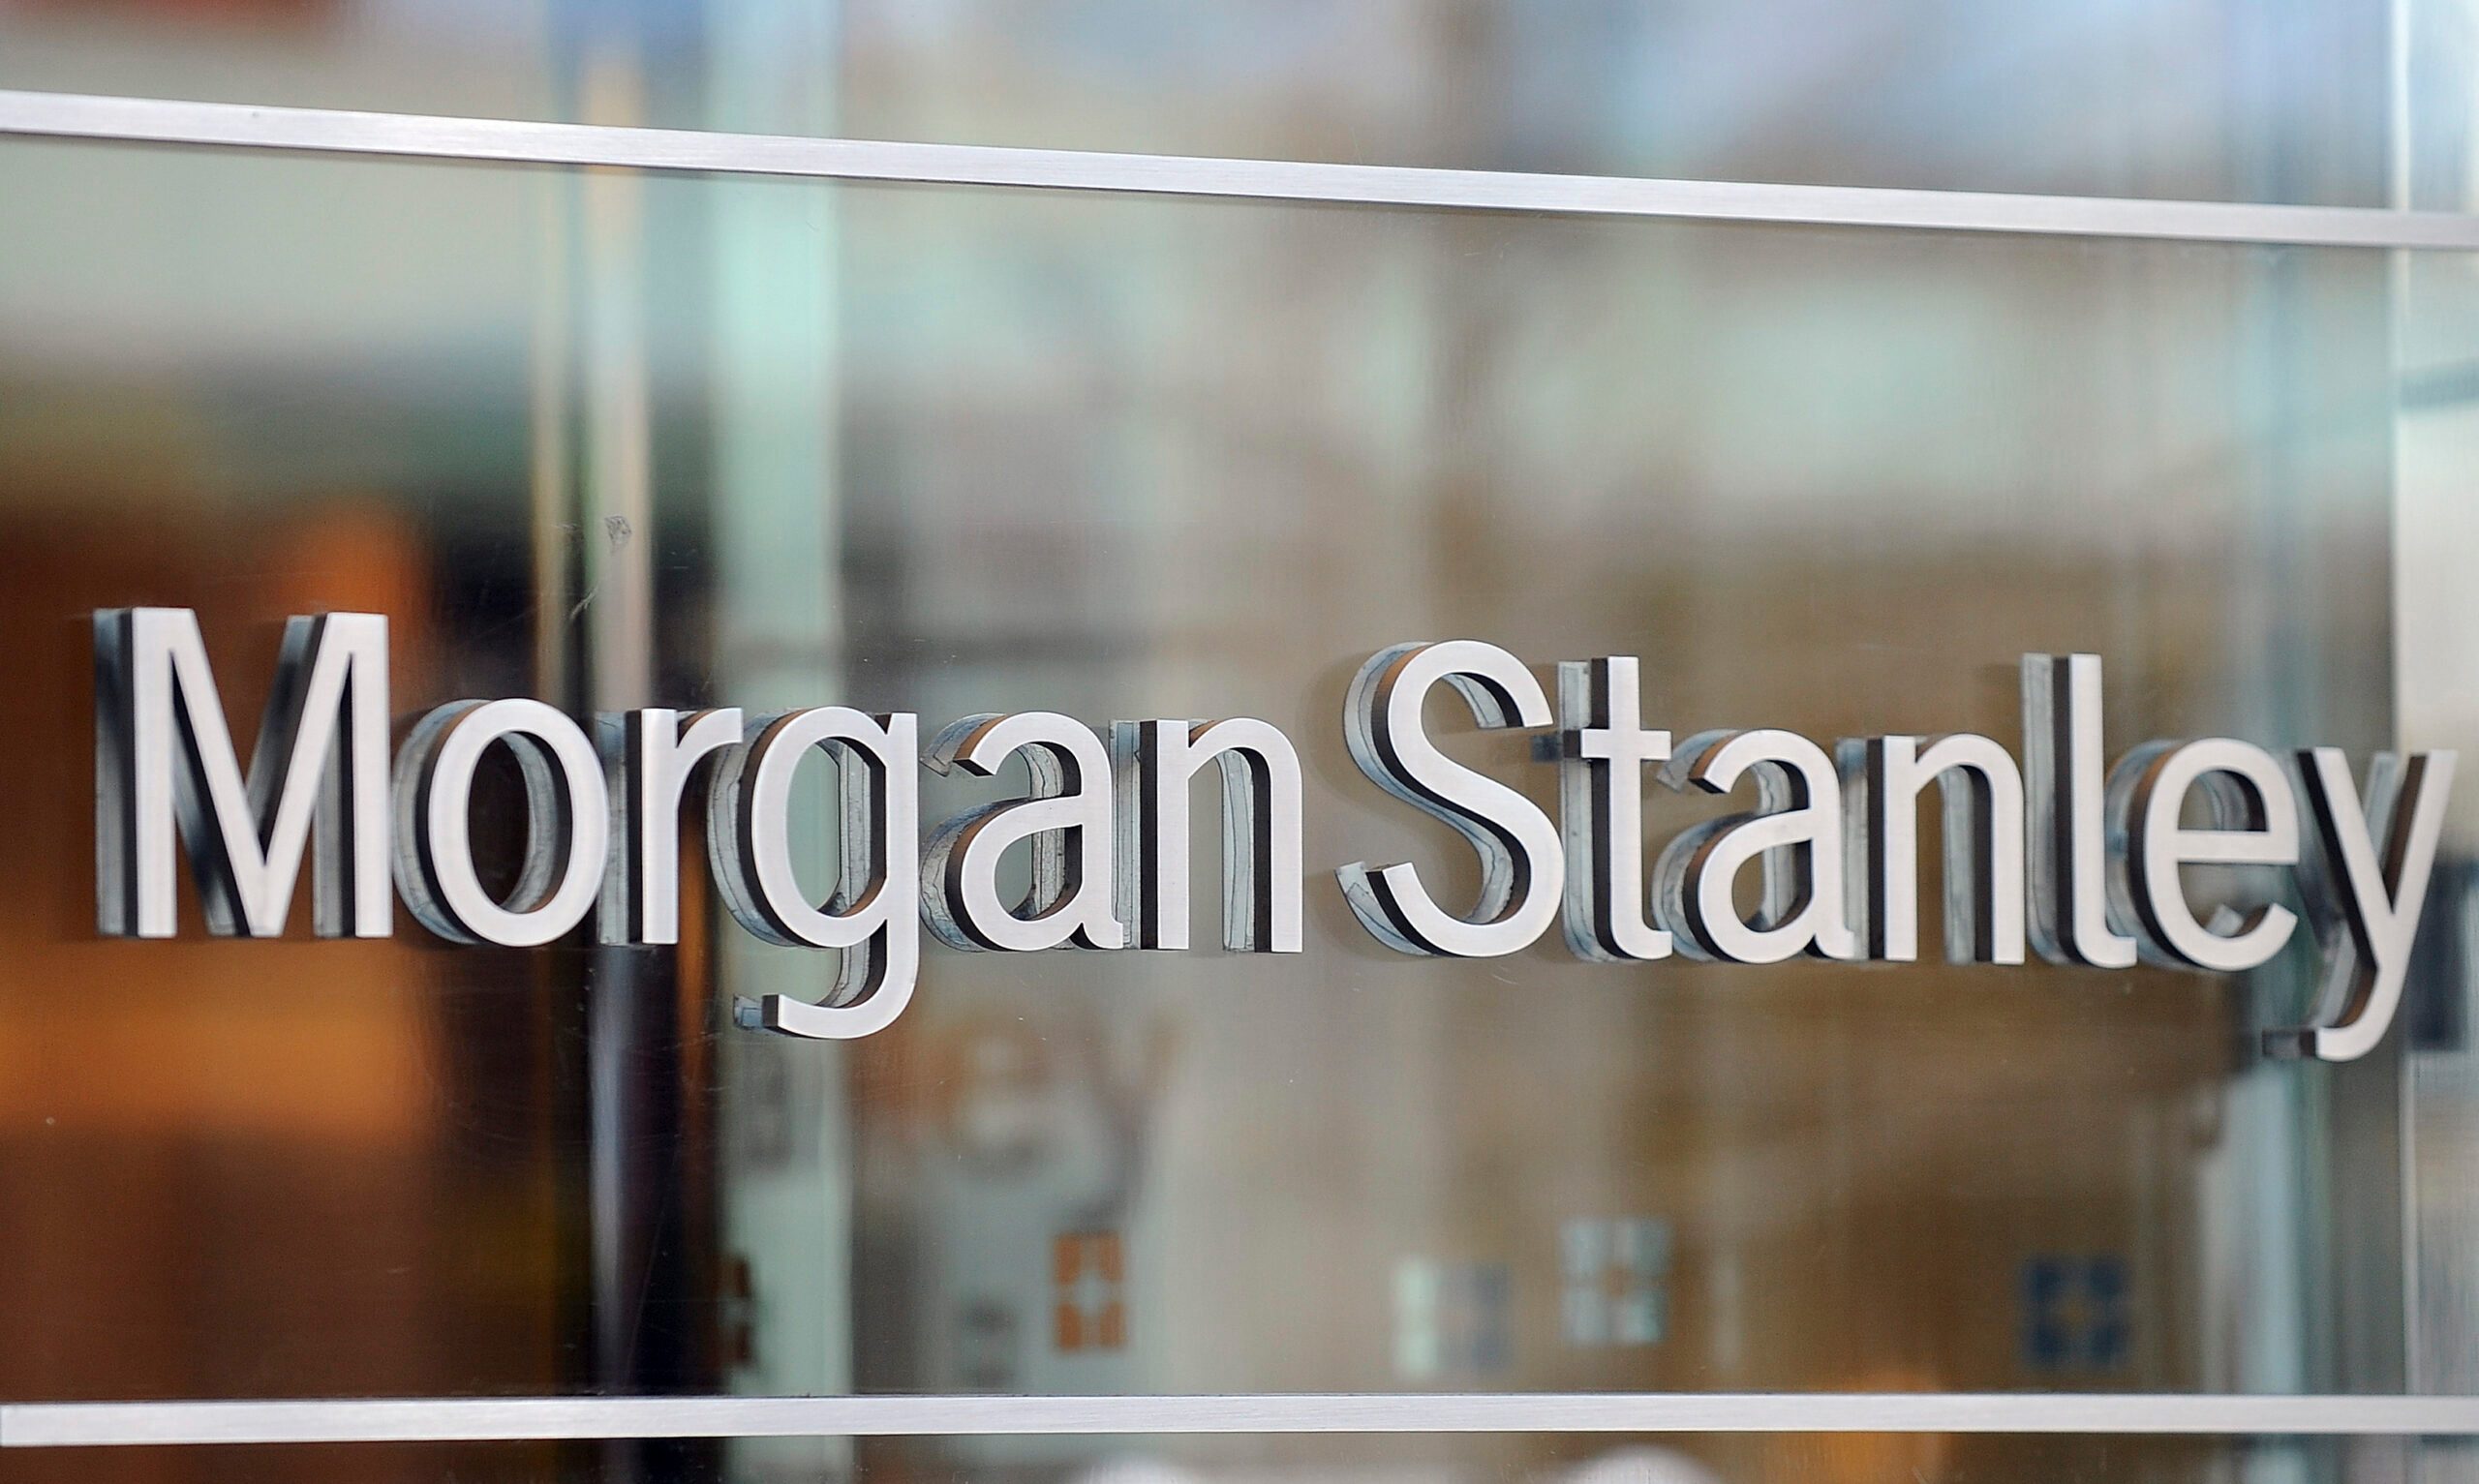 Morgan Stanley penalized $1M over data theft